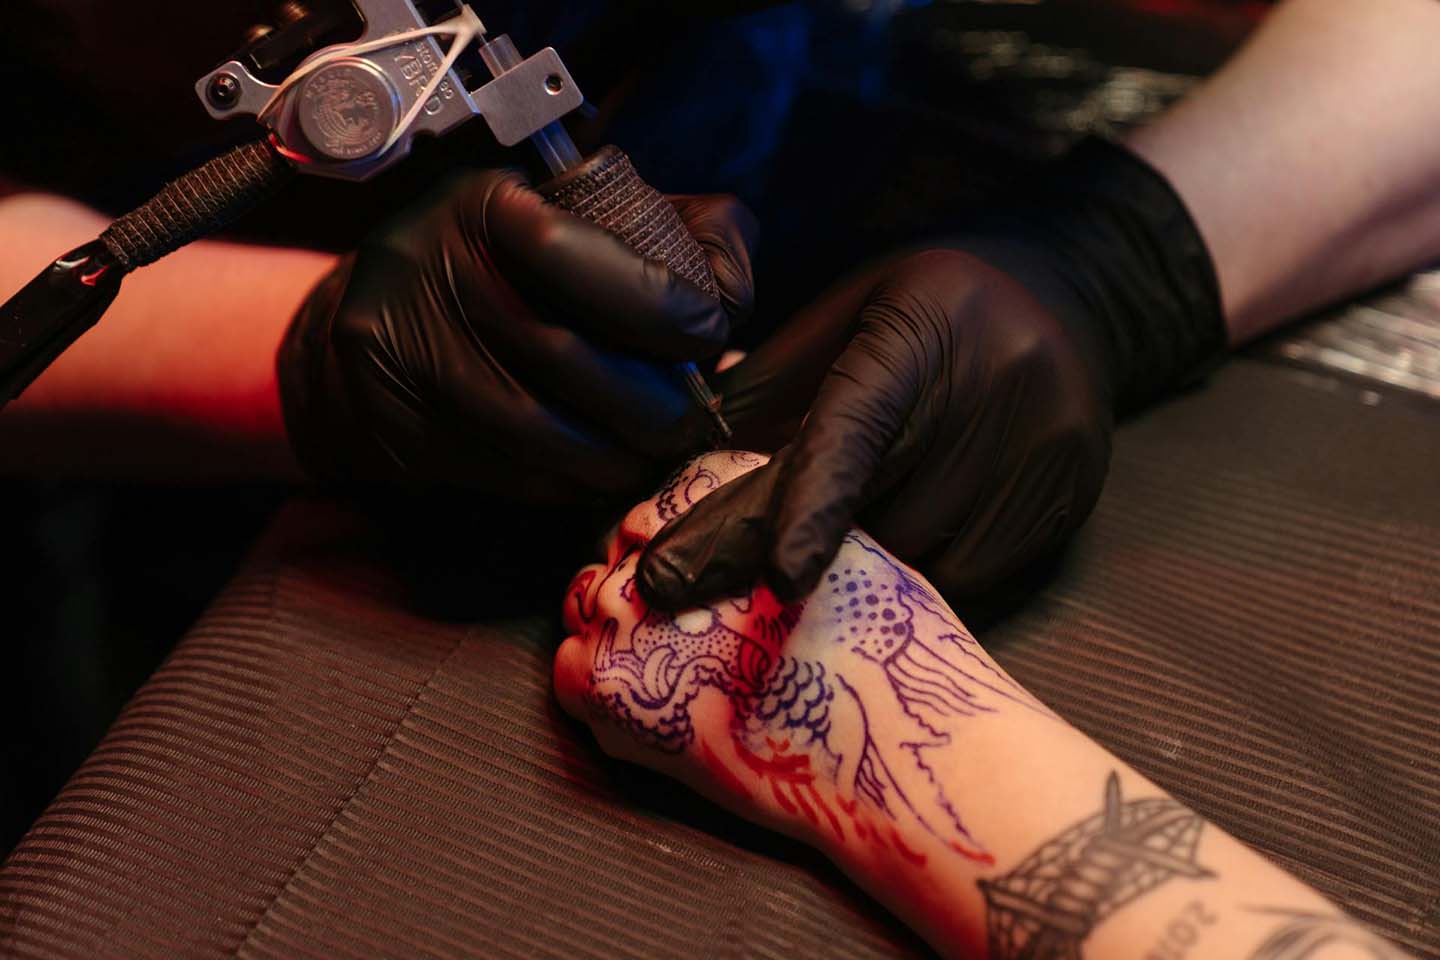 Person giving another person a hand tattoo, wearing black gloves